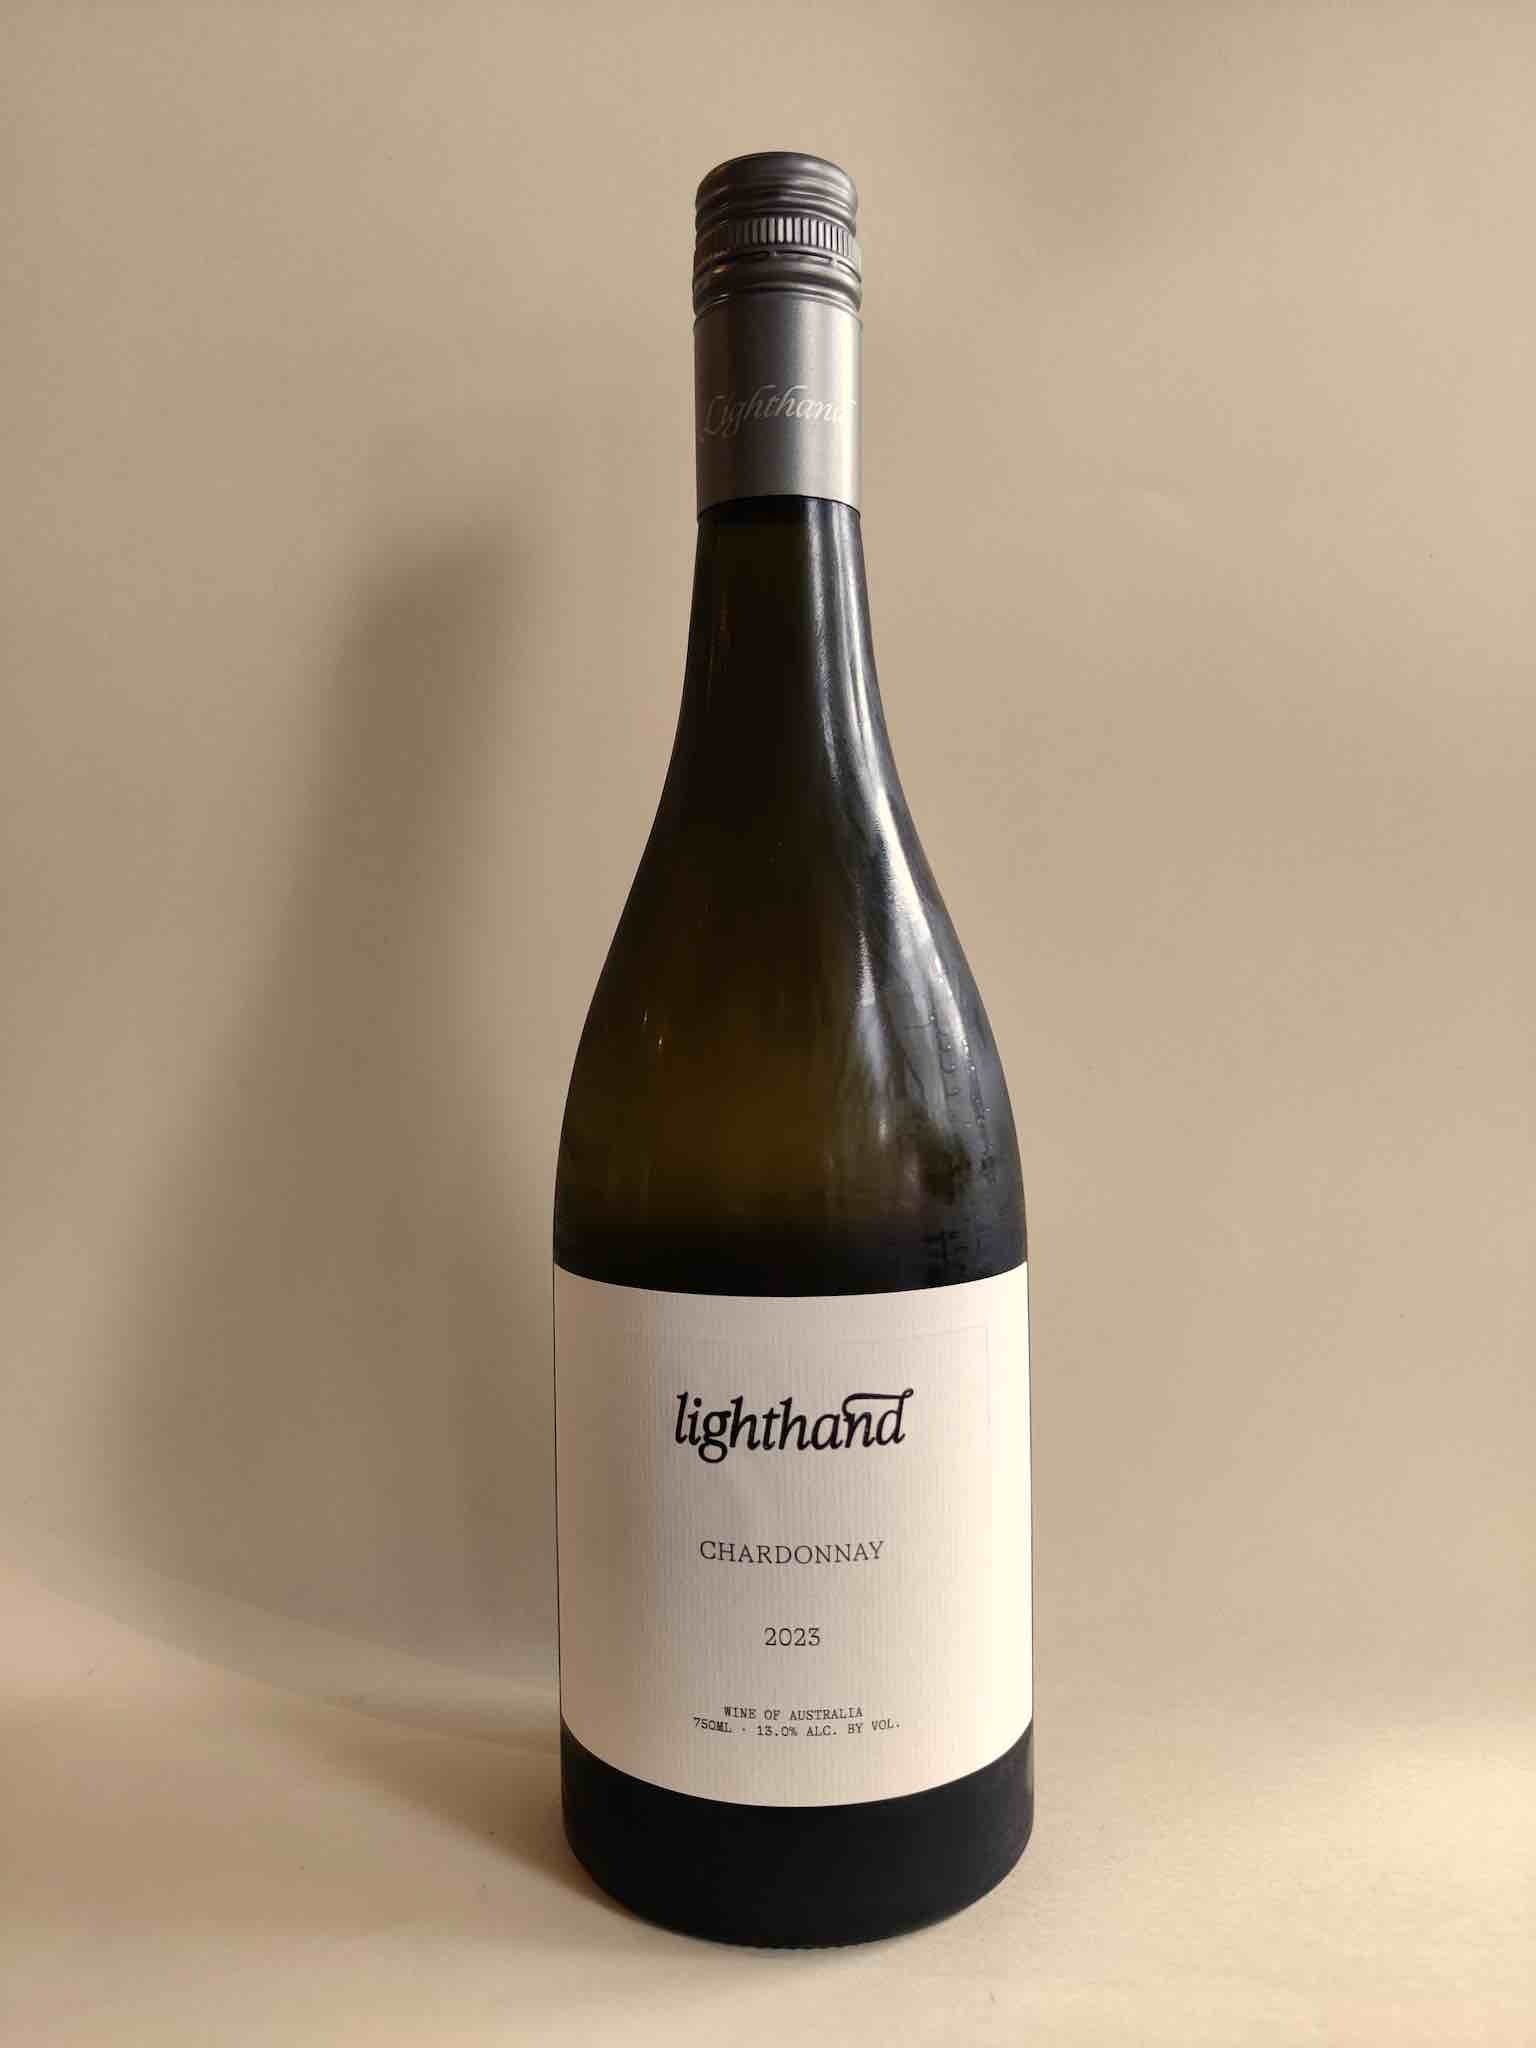 A bottle of 2022 Lighthand Chardonnay from the Yarra Valley, Victoria. 